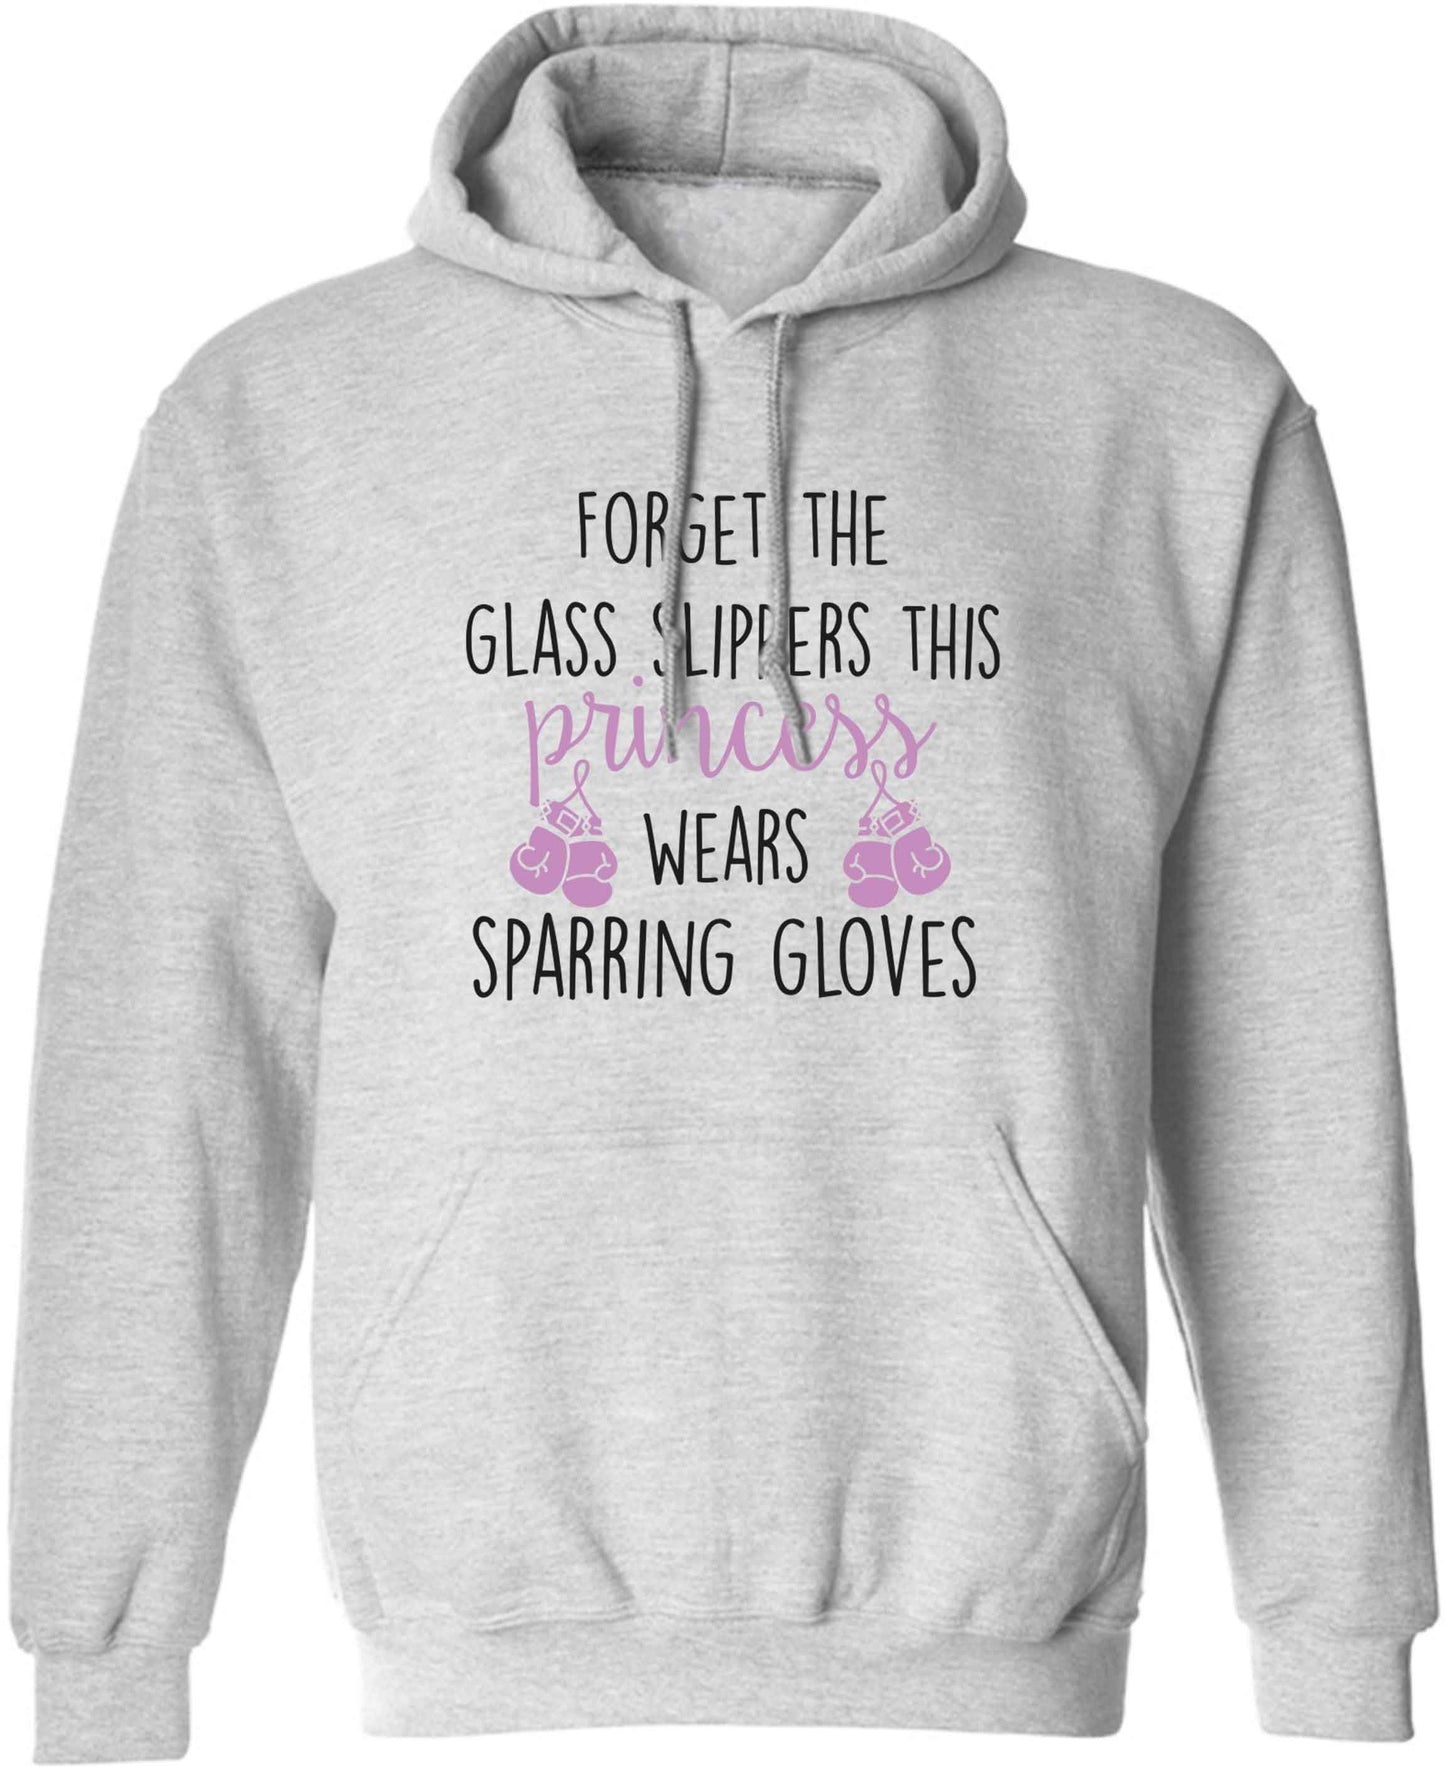 Forget the glass slippers this princess wears sparring gloves adults unisex grey hoodie 2XL